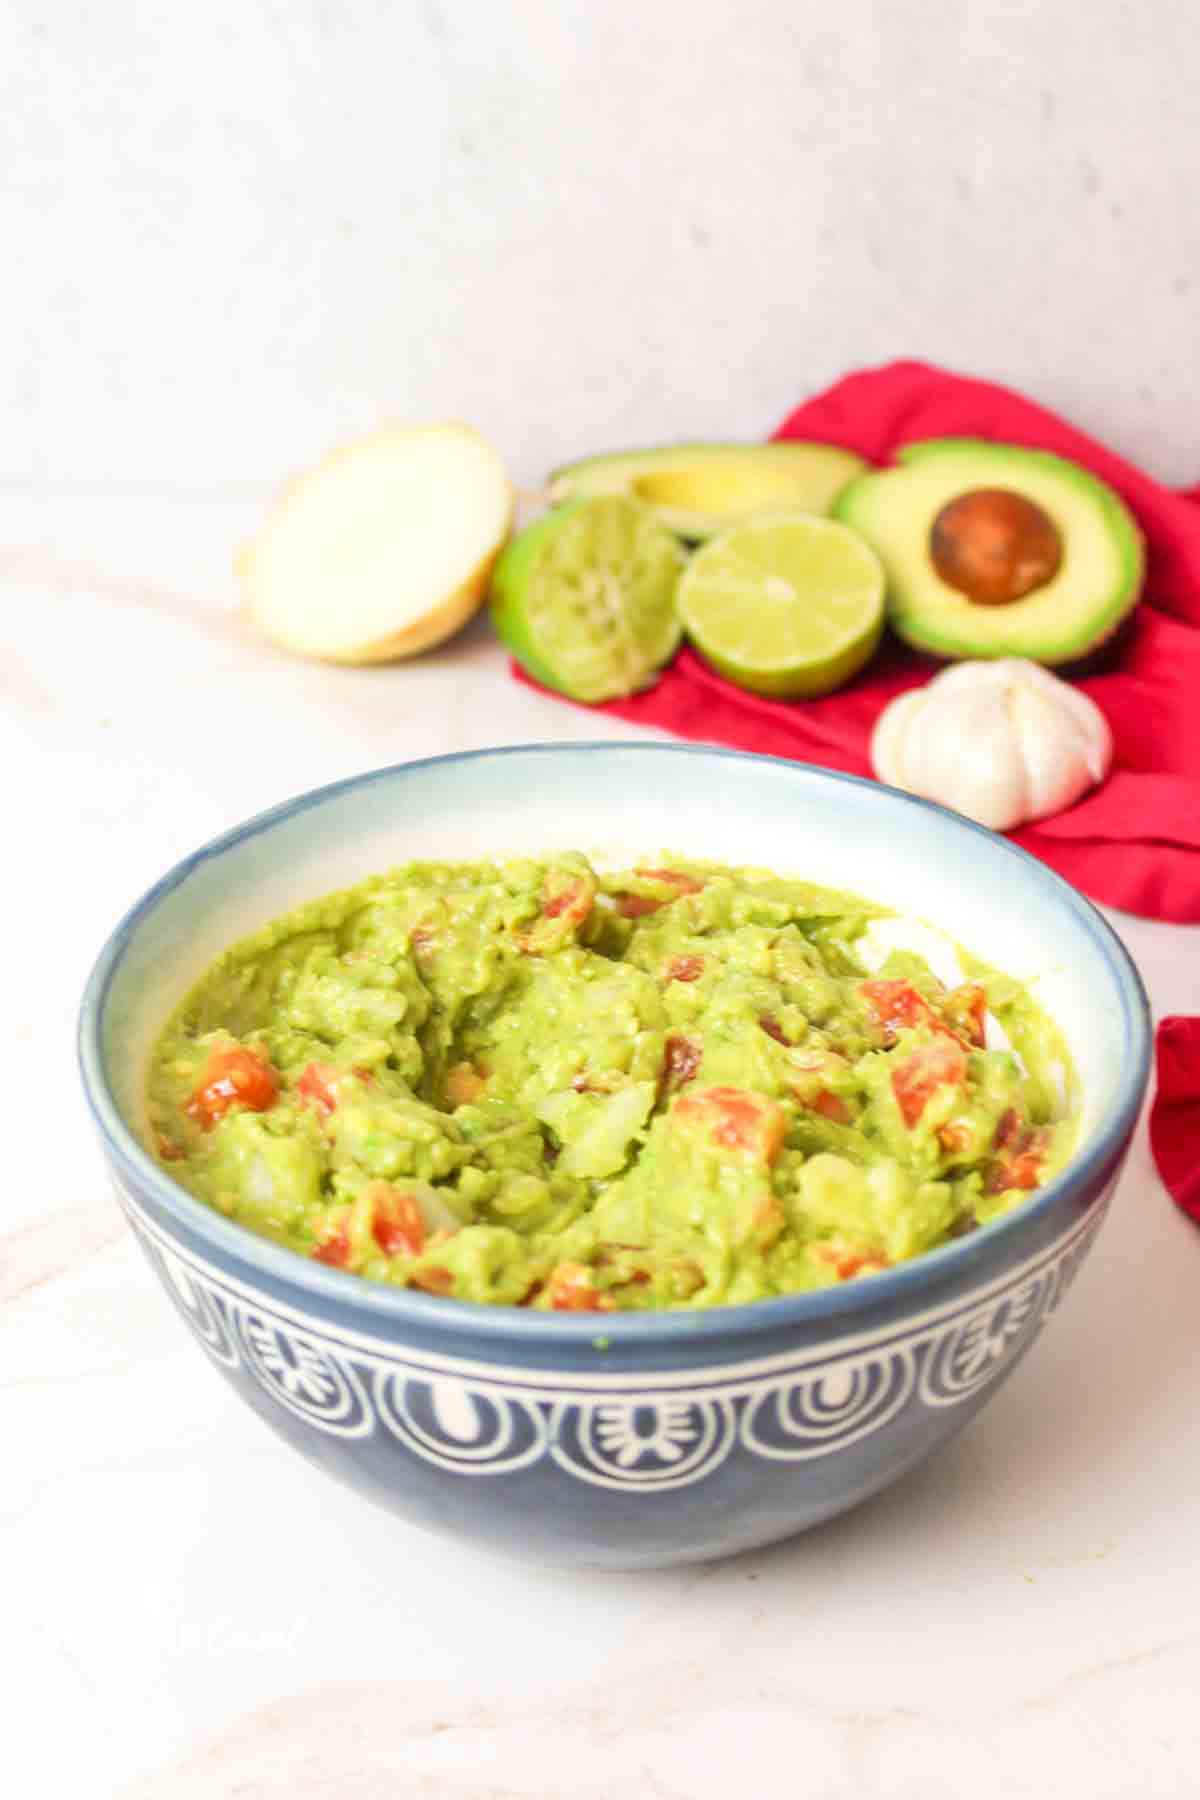 a blue bowl filled with guacamole and scattered ingredients in the background